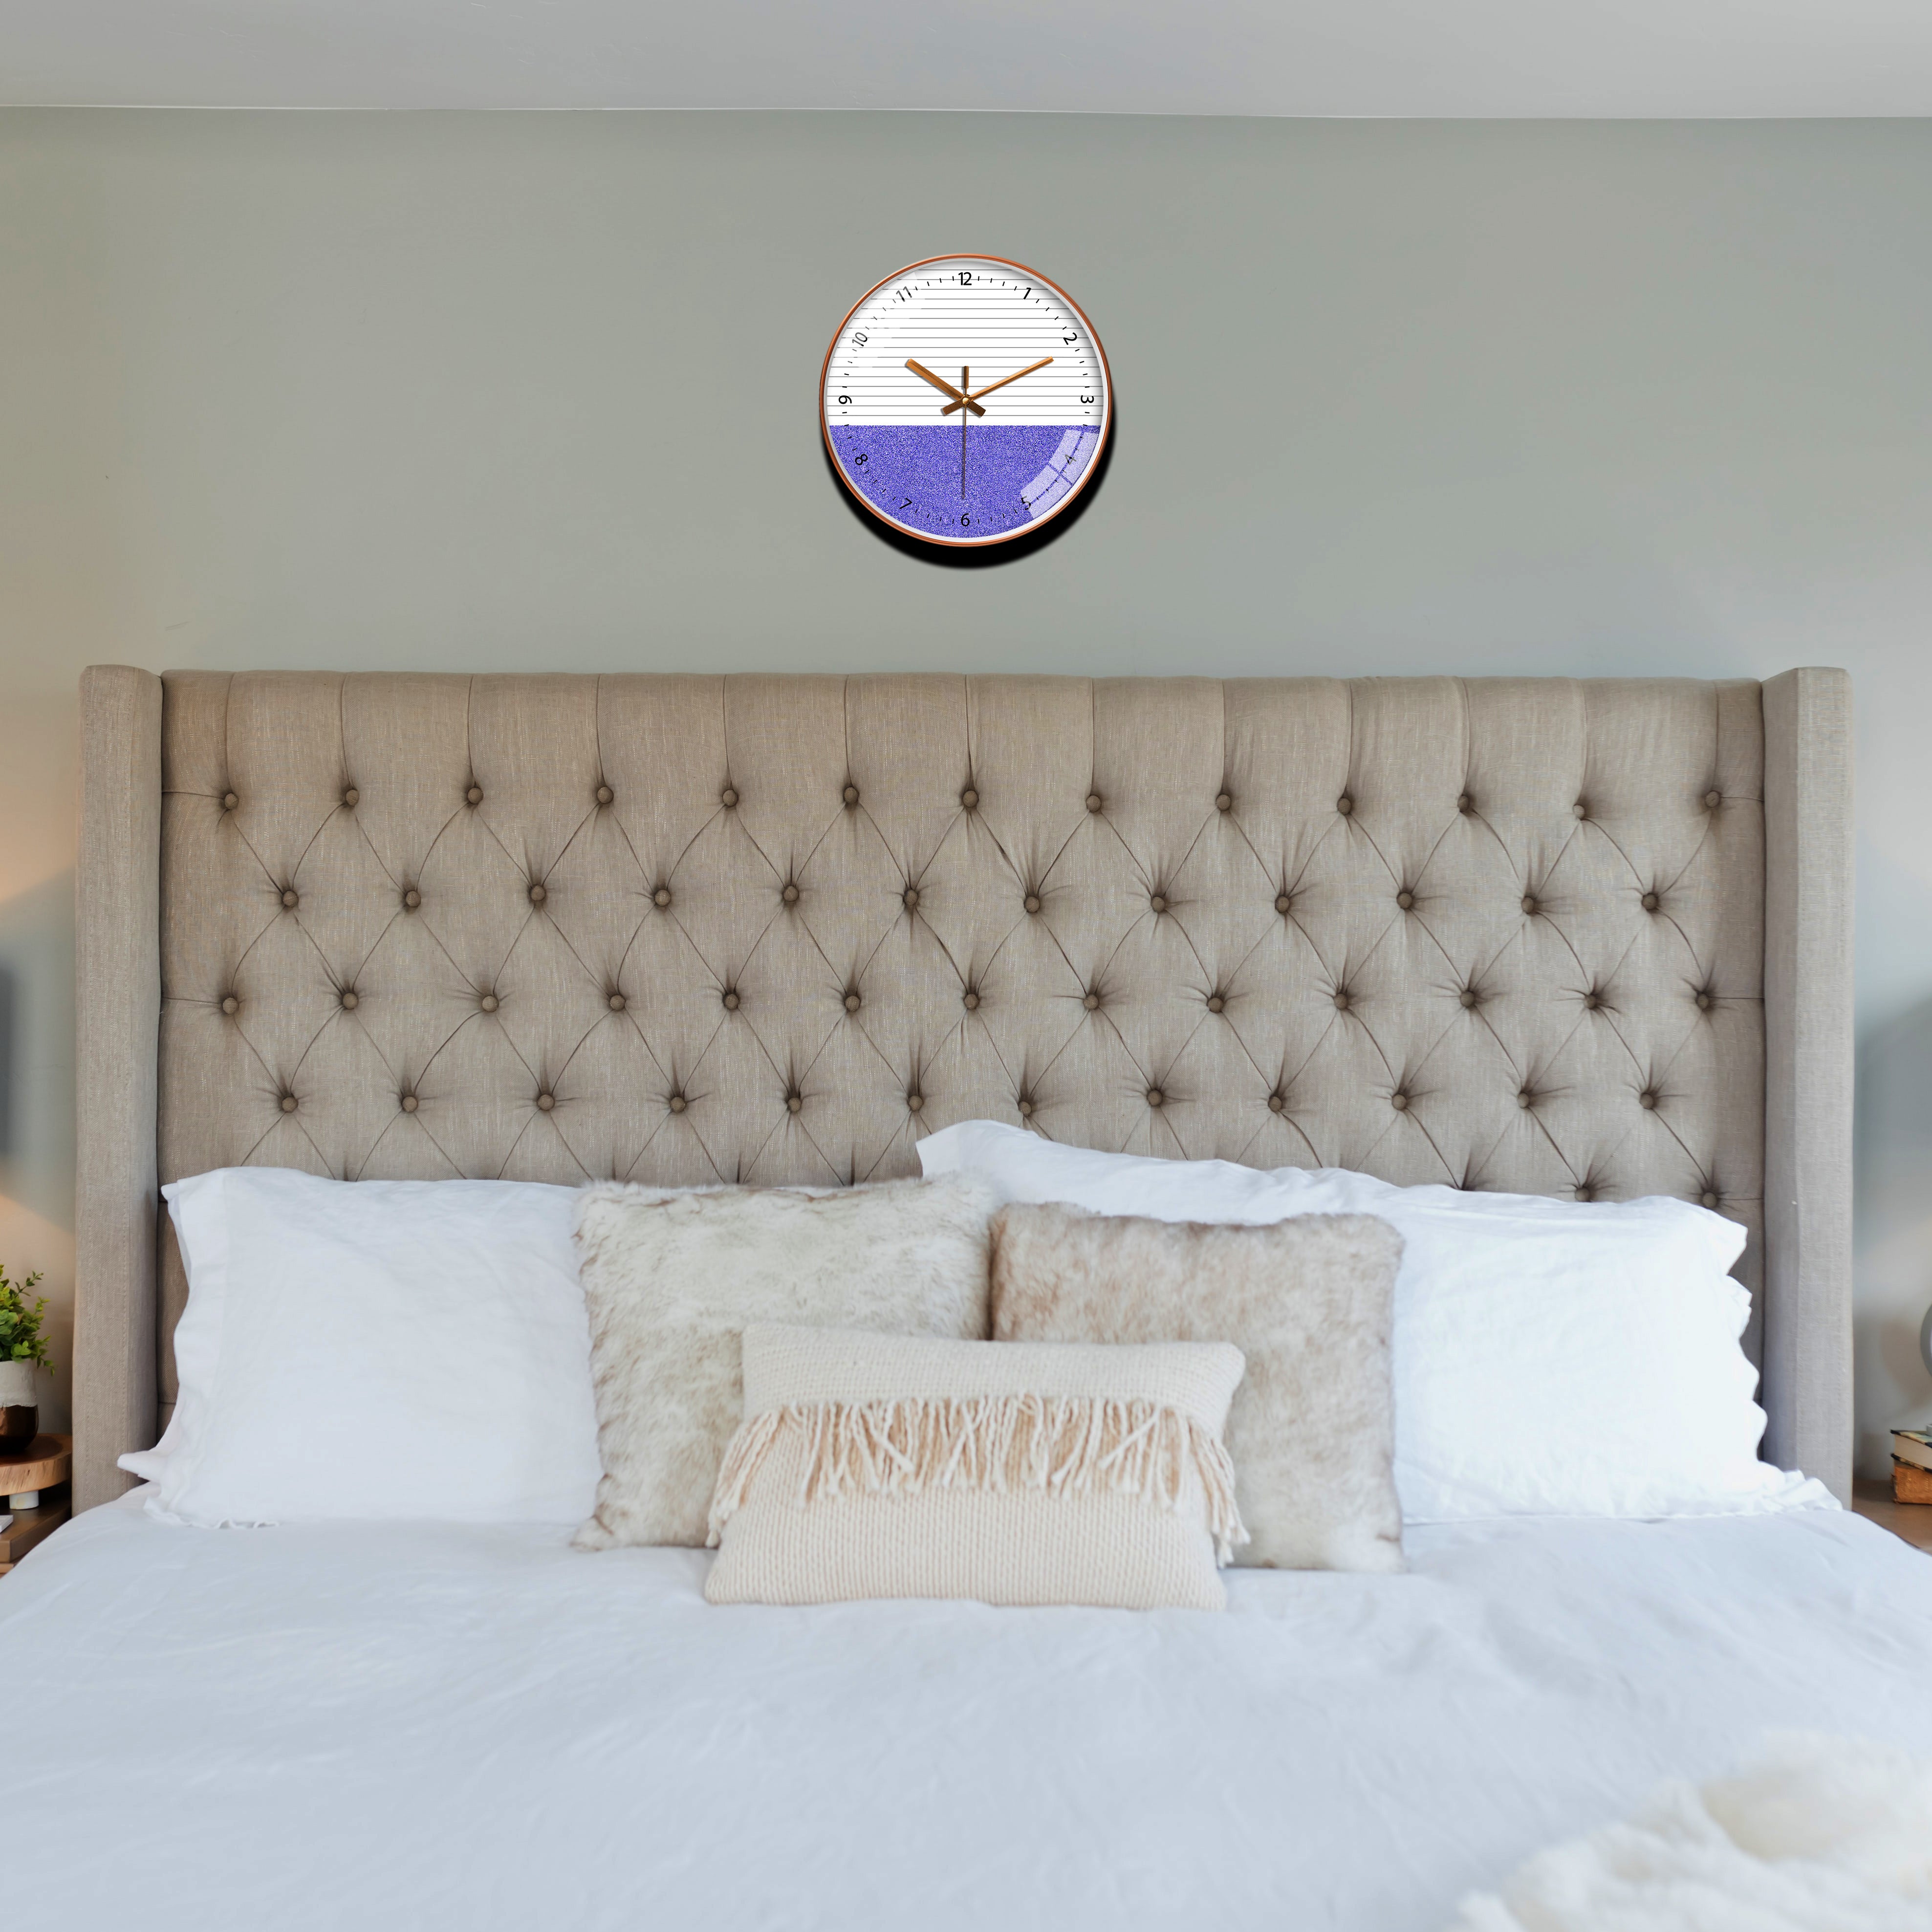 Wall Clock for Home | Living Room| Office | Purple & White - Star Work 